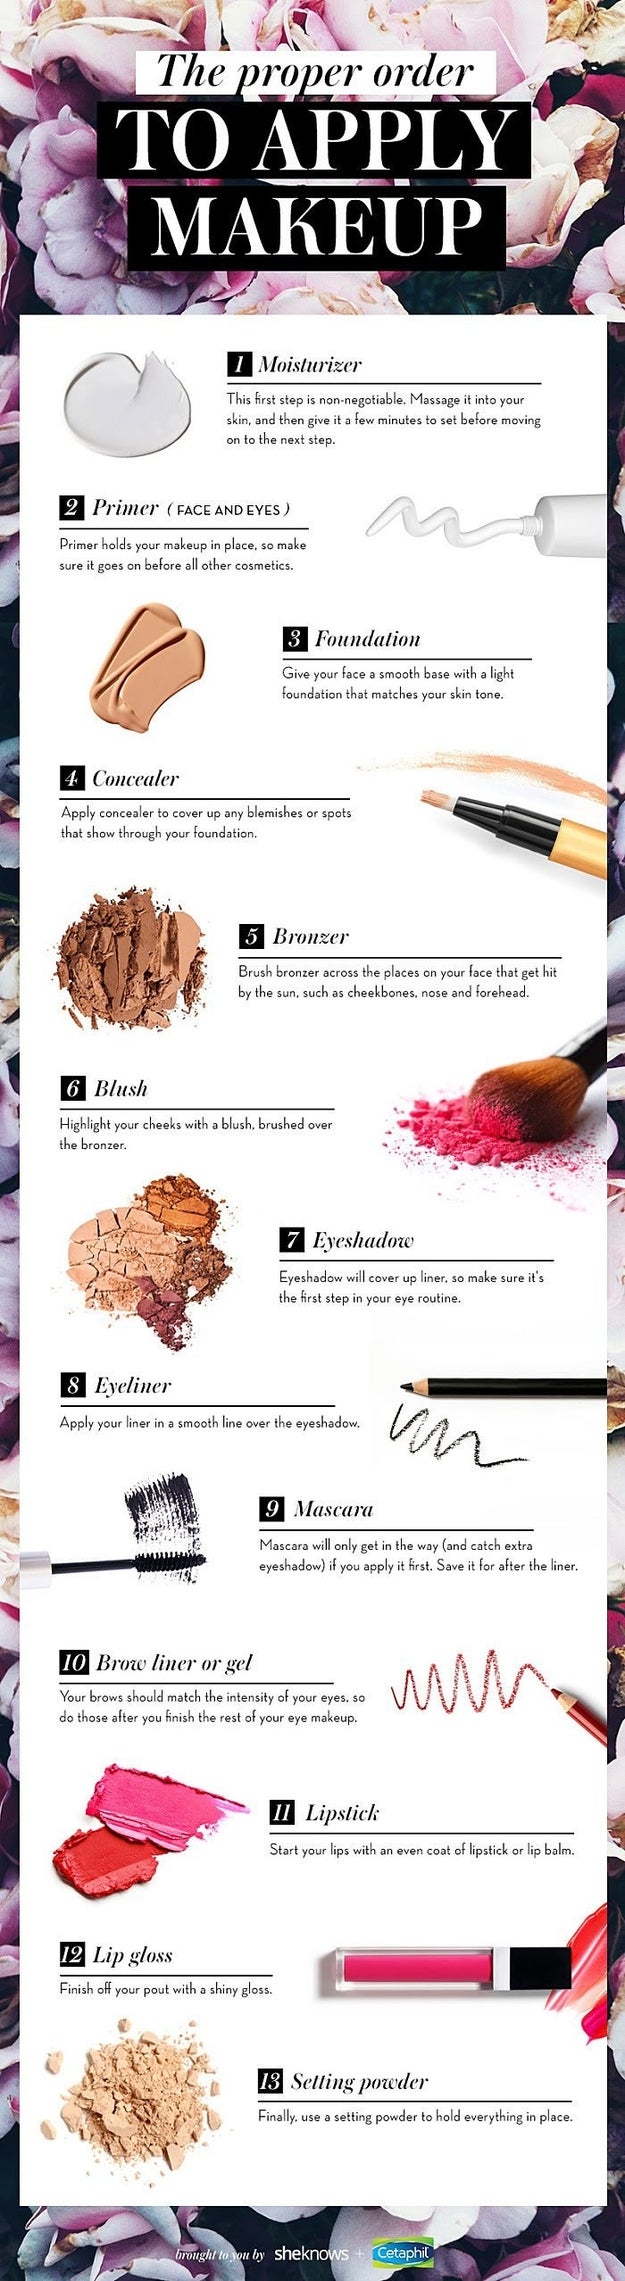 Apply foundation before concealer to catch whatever the foundation didn't cover.